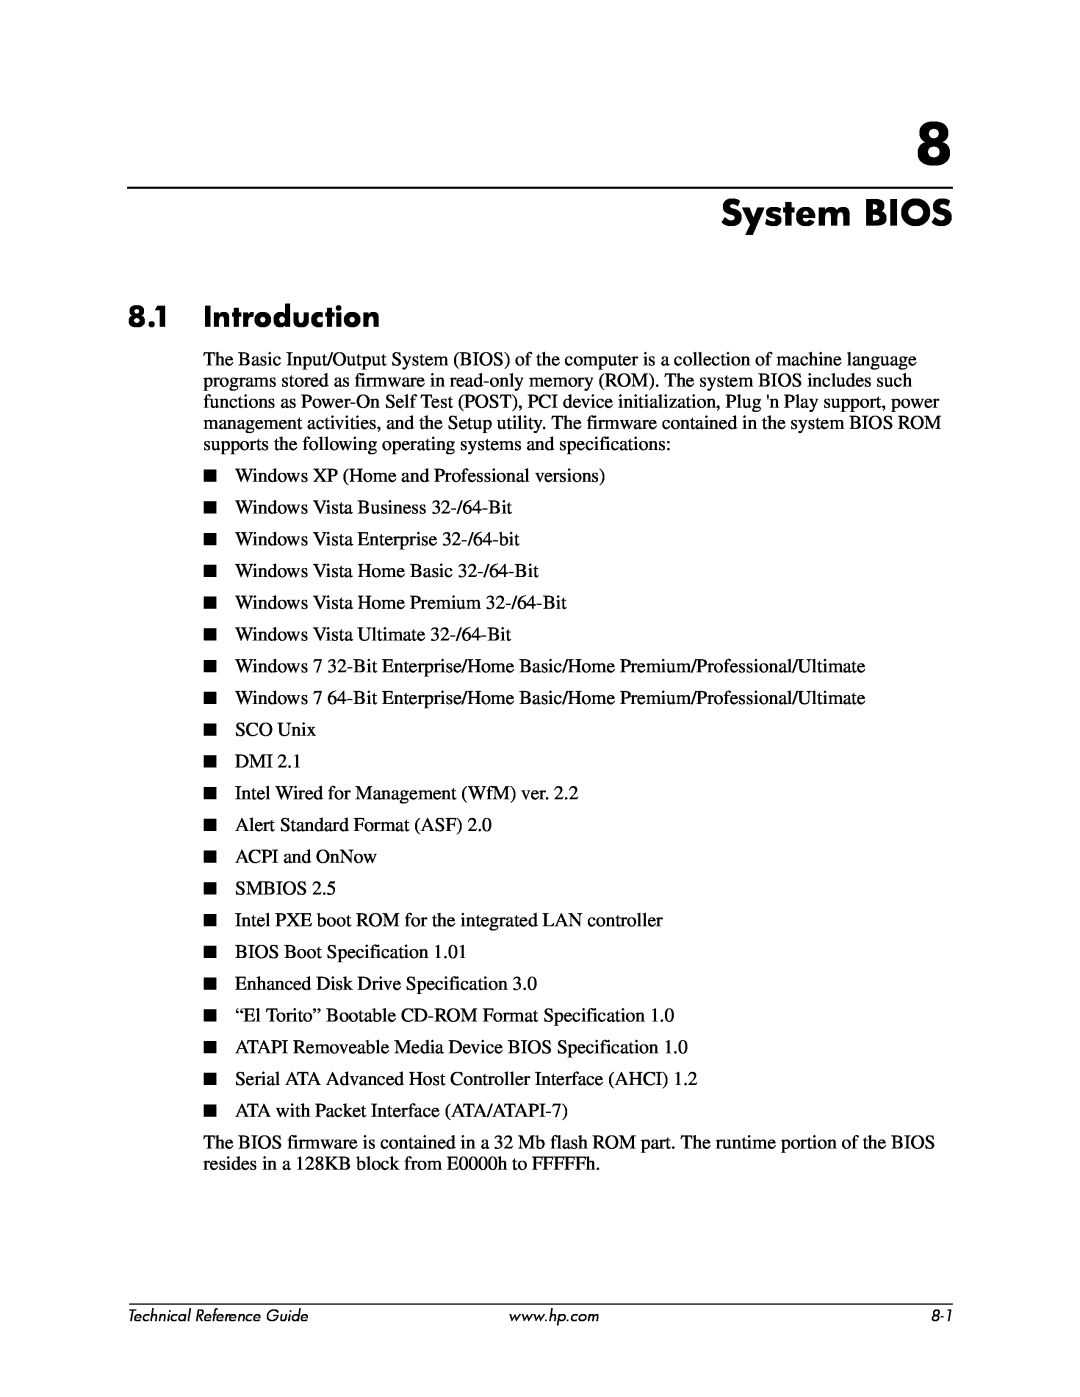 HP 8000 tower manual System BIOS, Introduction 